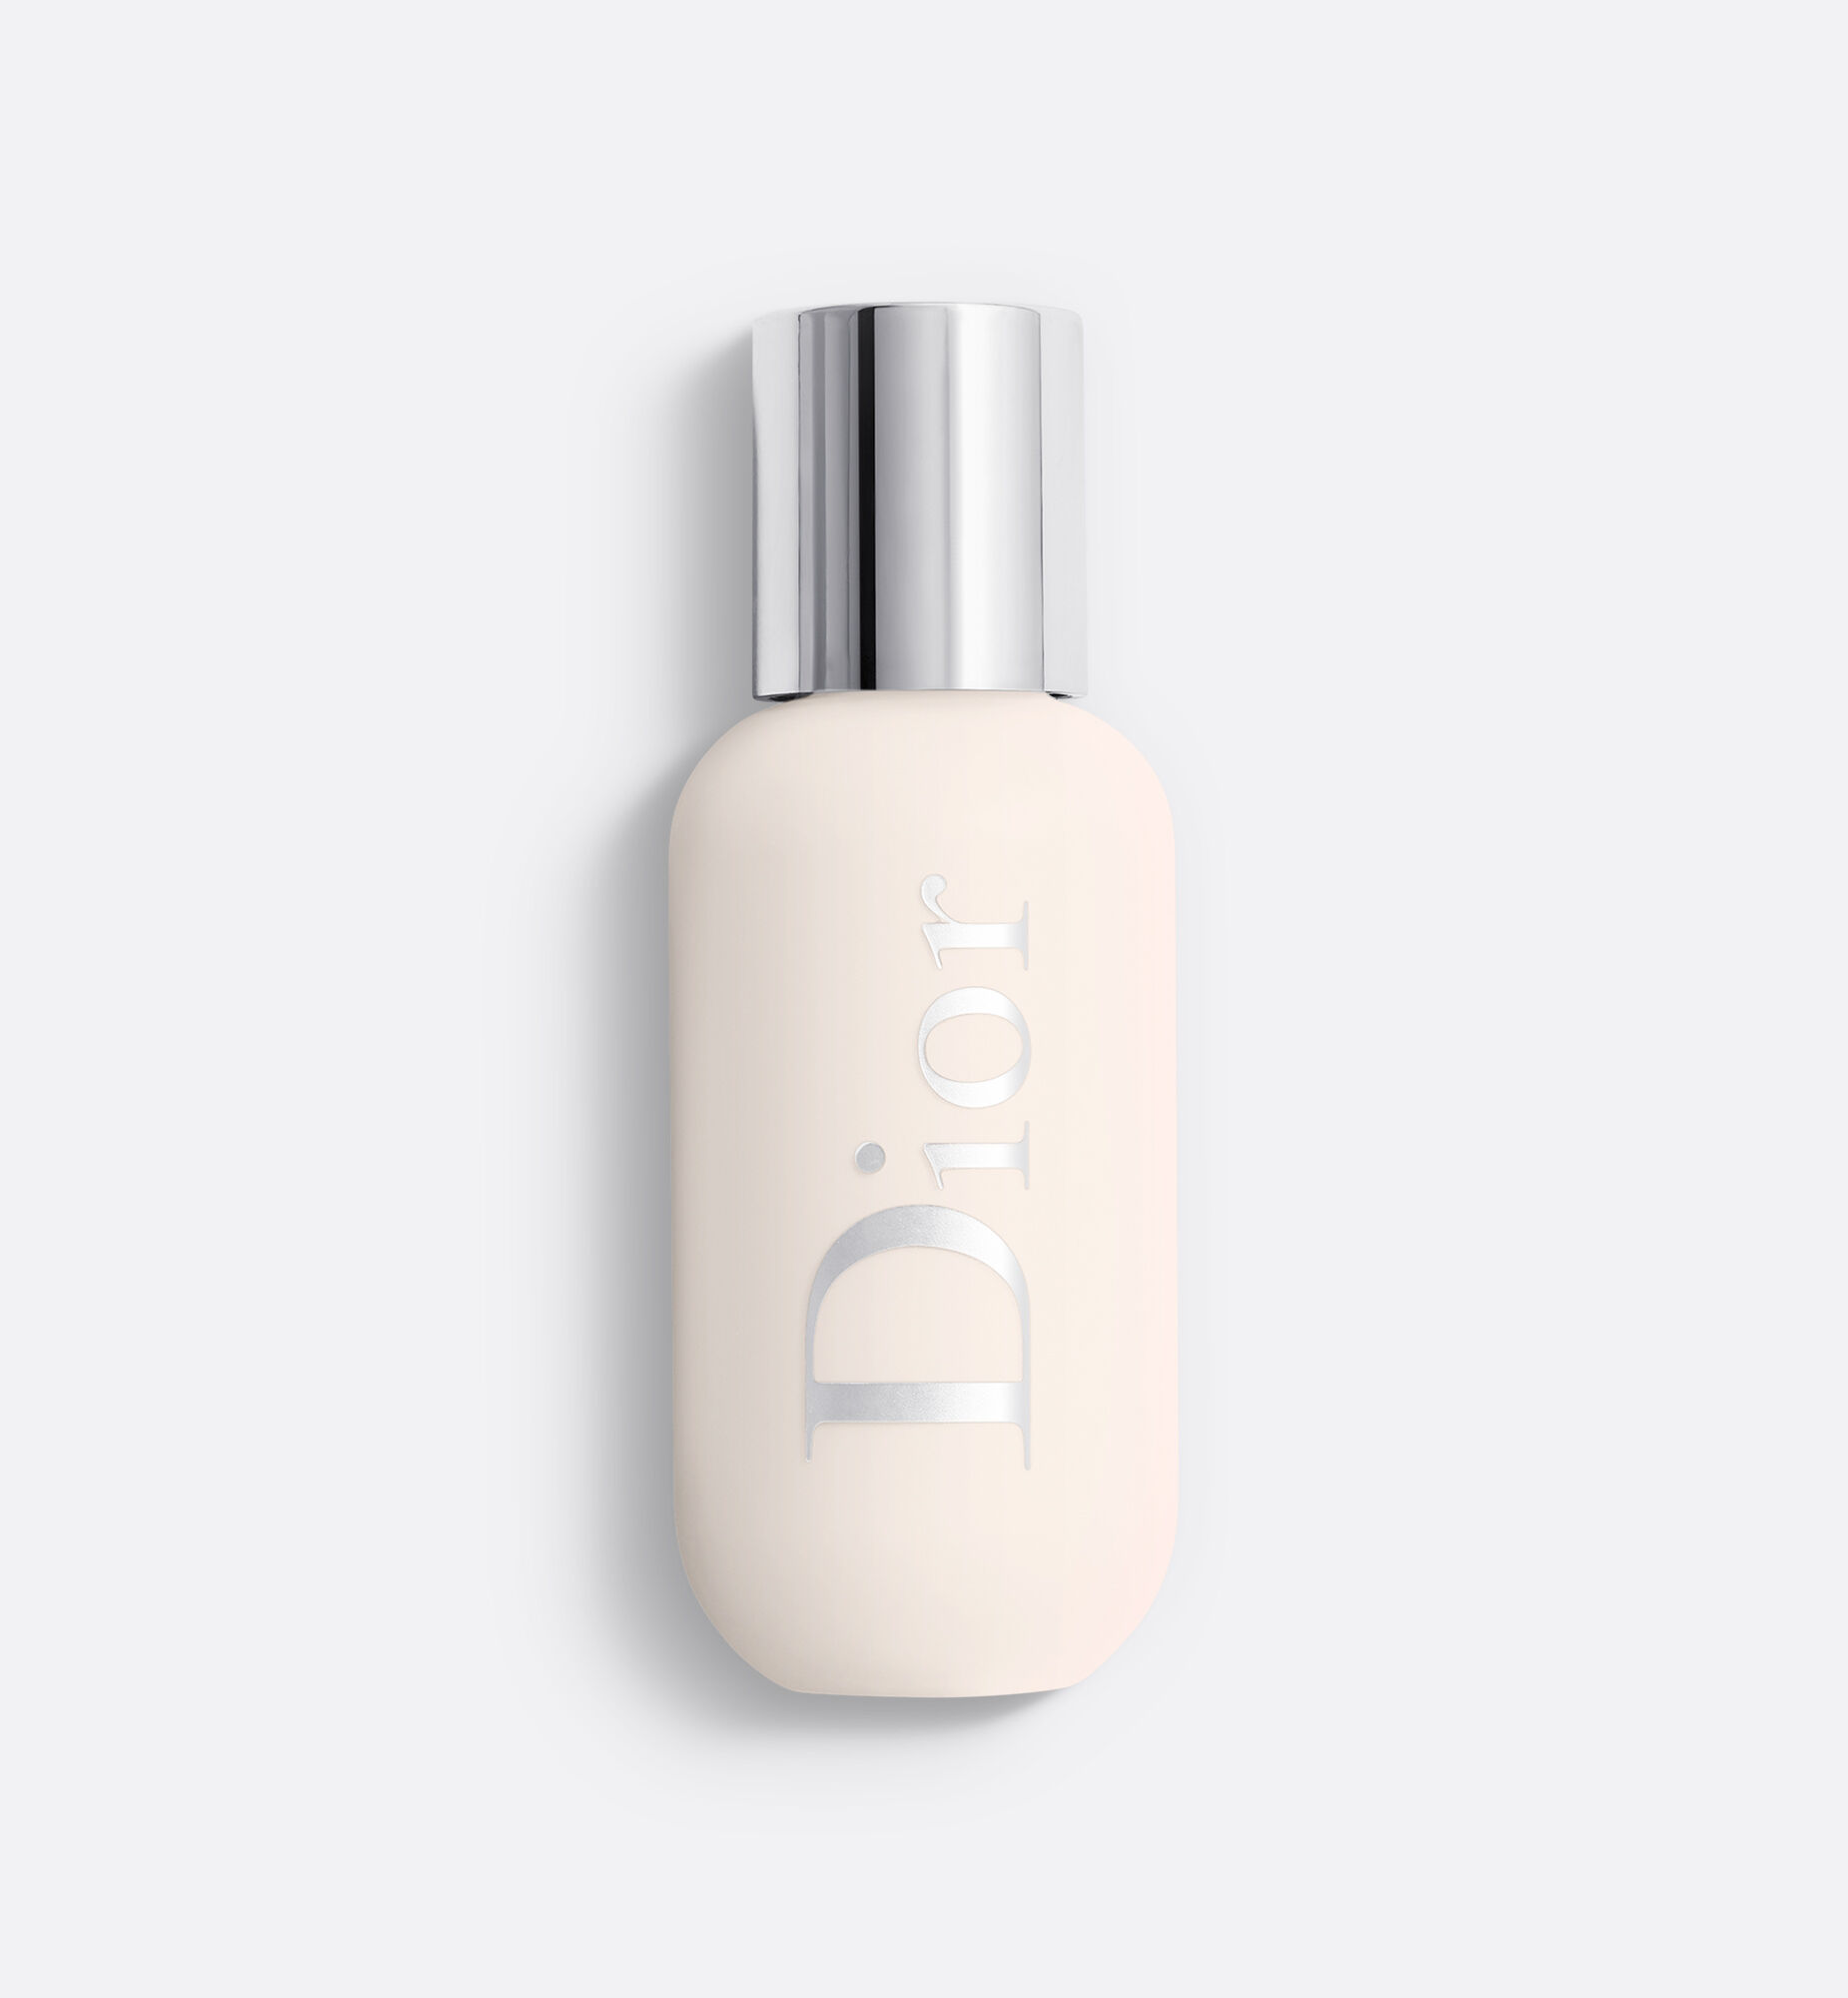 The Body And Beauty Dior